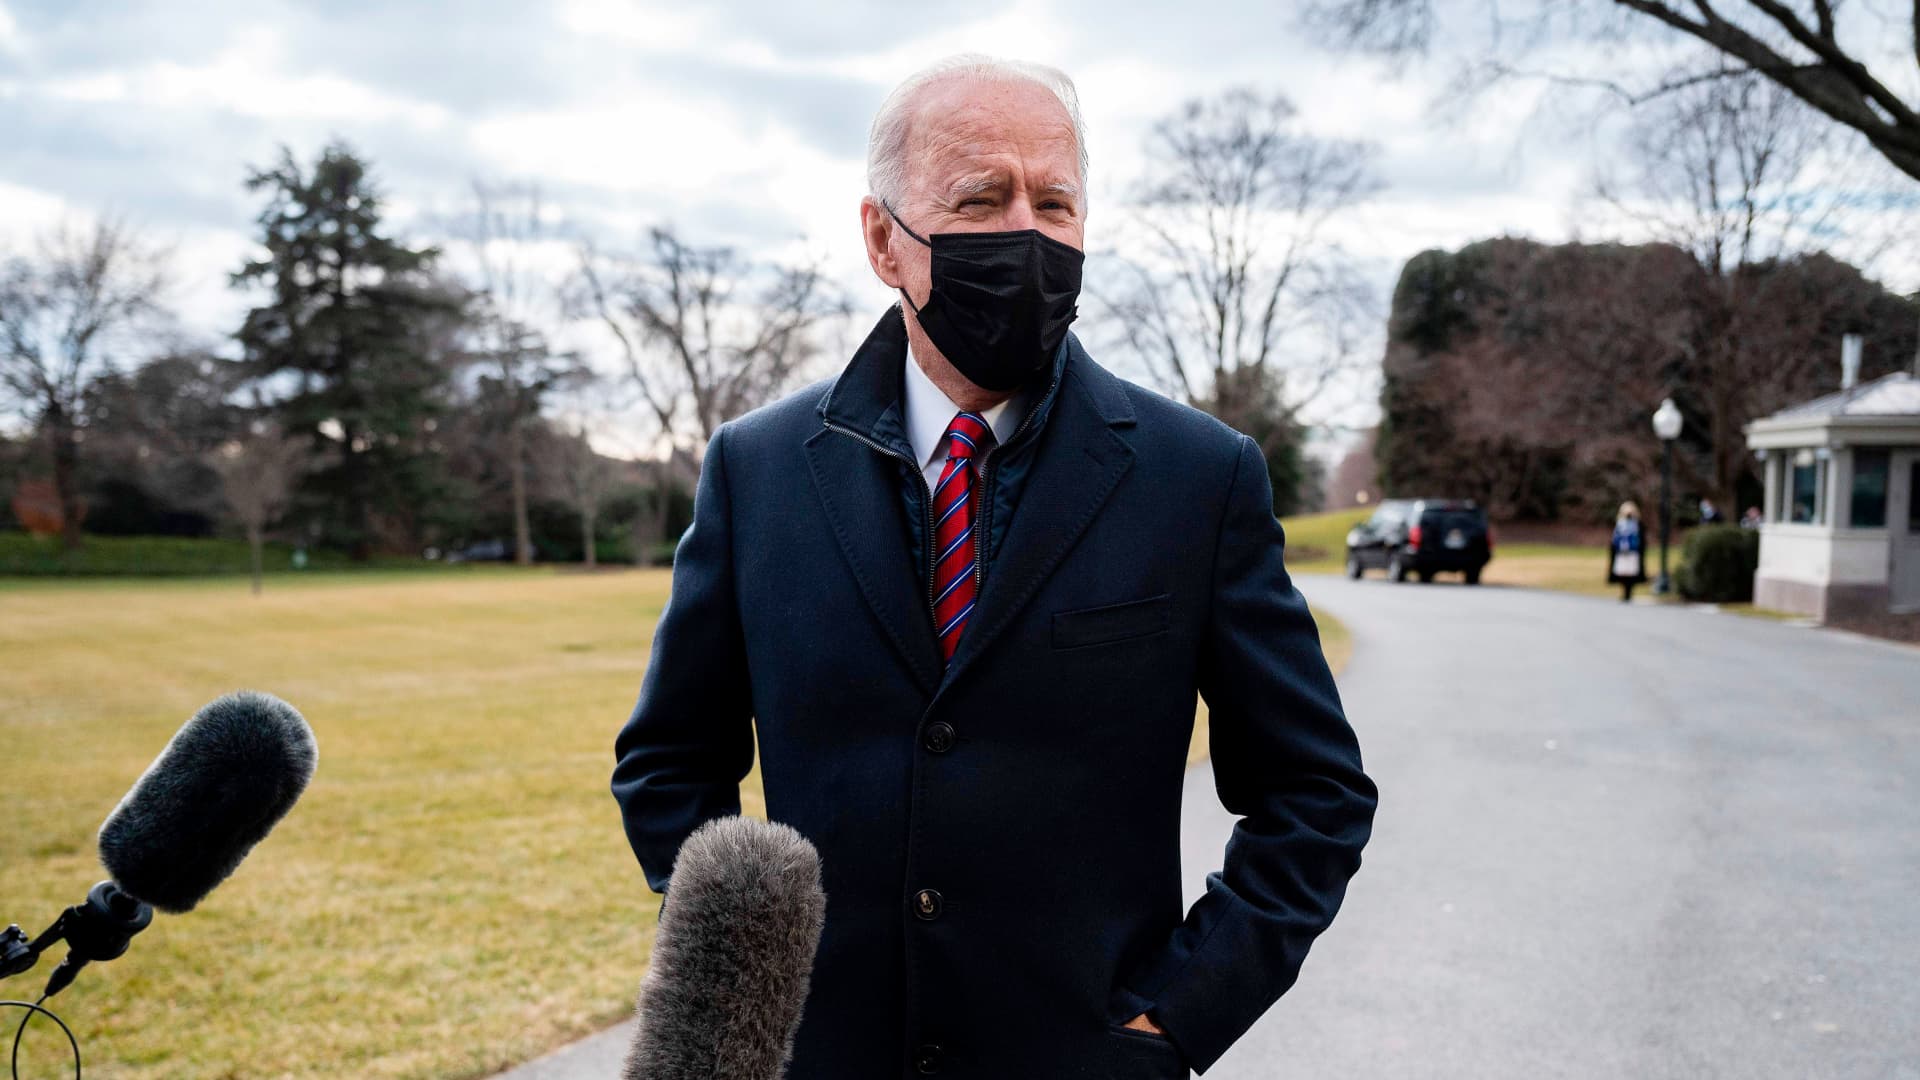 President Joe Biden speaks to the press as he departs the White House in Washington, DC, on January 29, 2021. - Biden travels to Walter Reed National Military Medical Center in Bethesda, Maryland.